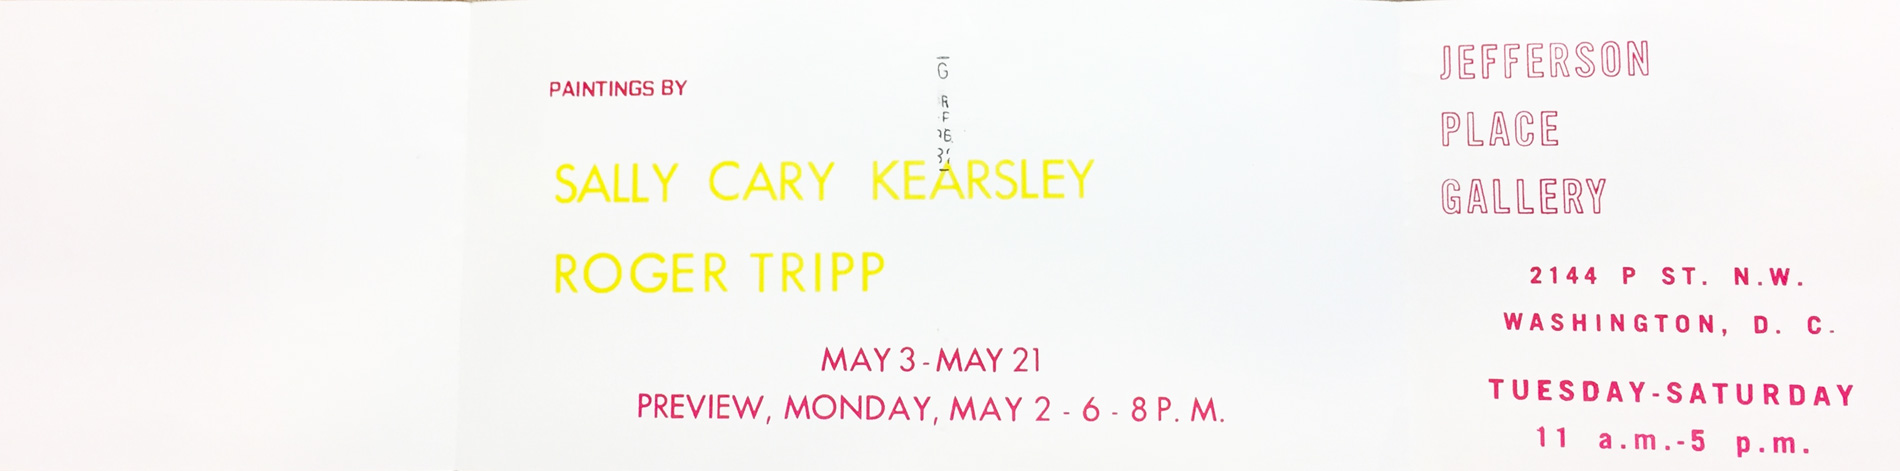 Announcement card for Sally Cary Kearsley and Roger Tripp paintings at Jefferson Place Gallery